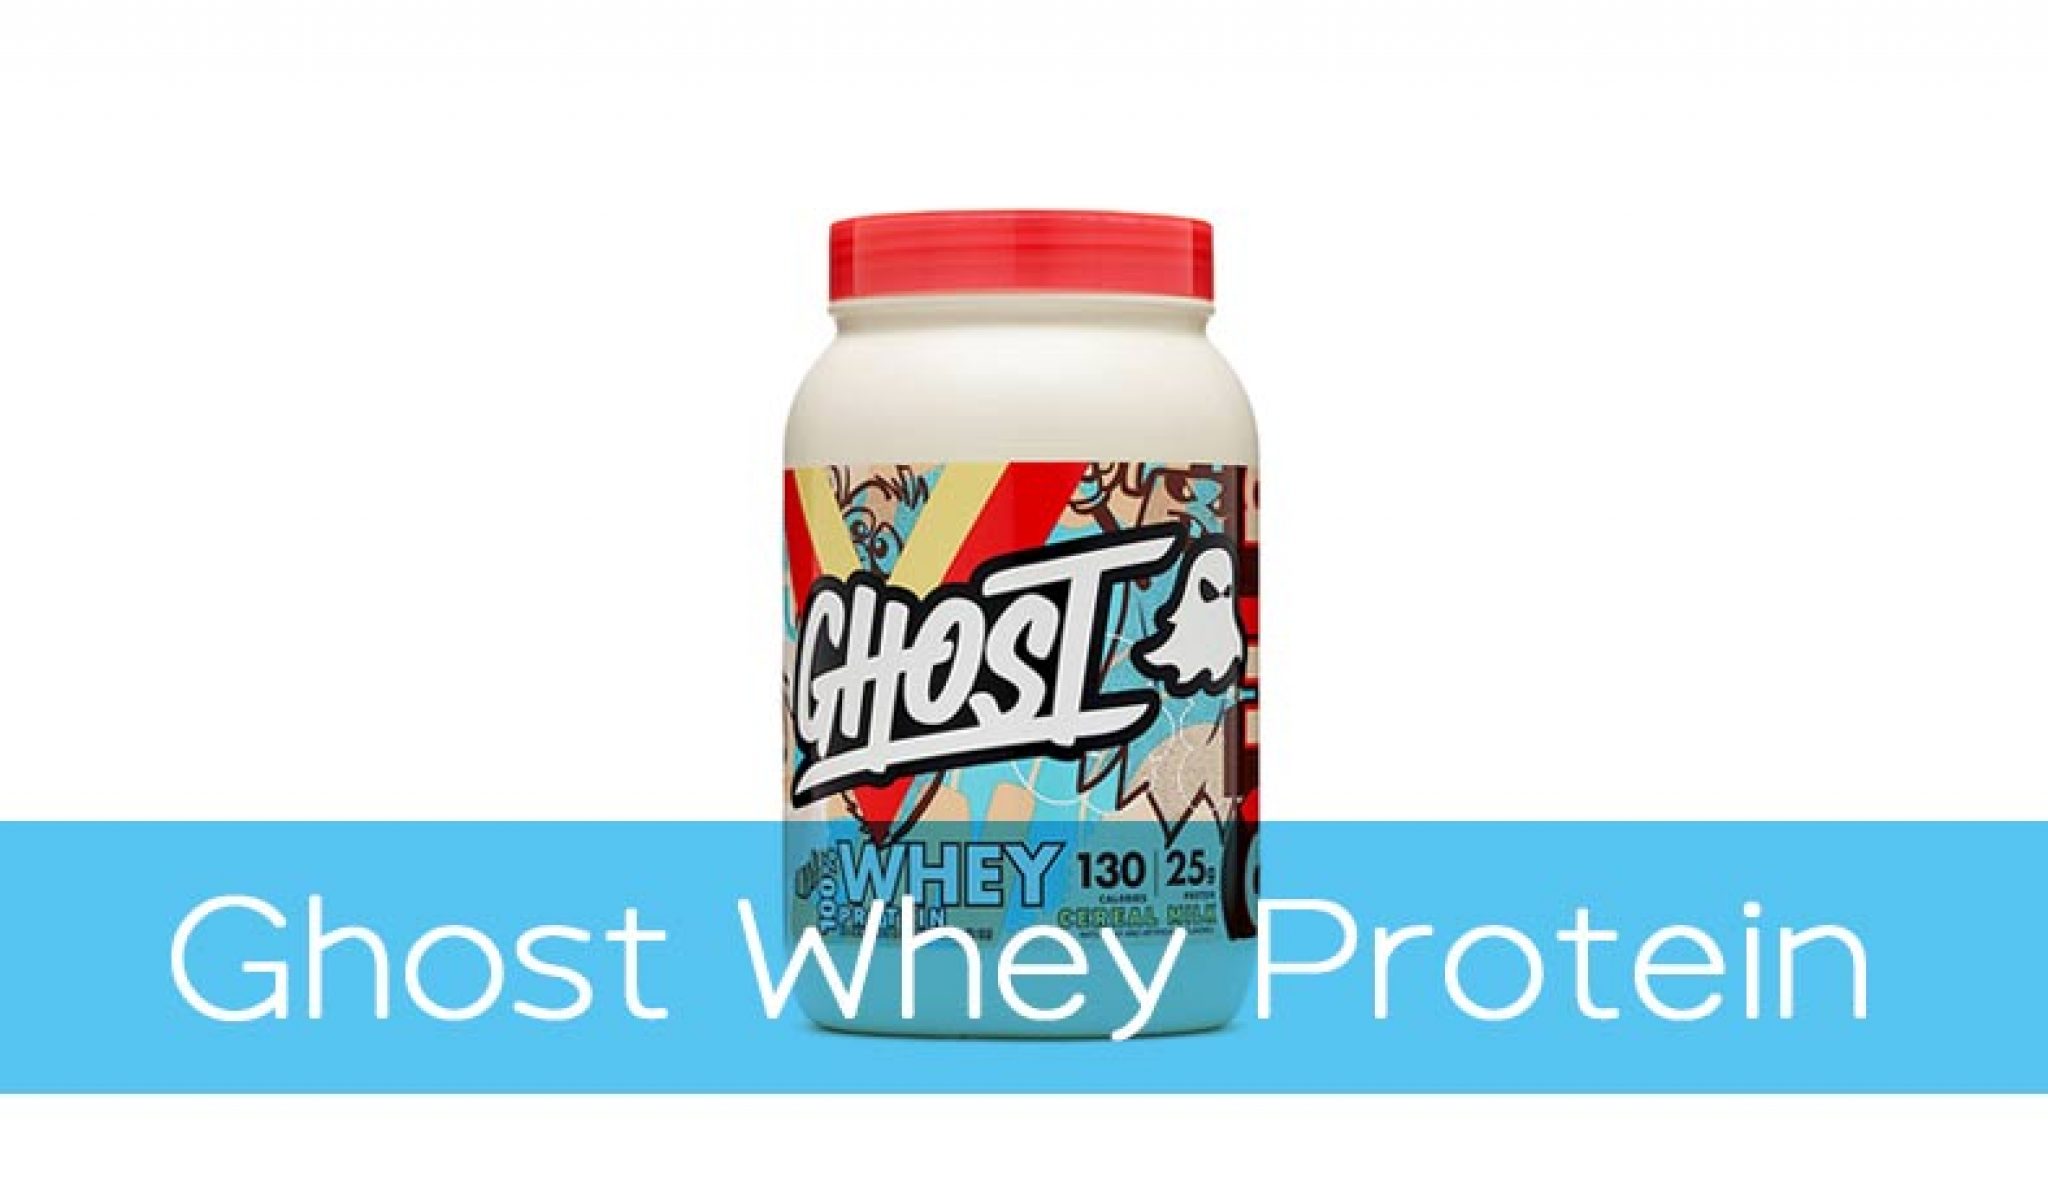 Ghost Whey Protein Review – Is It Good For Fitness? - Lafitness Reviews